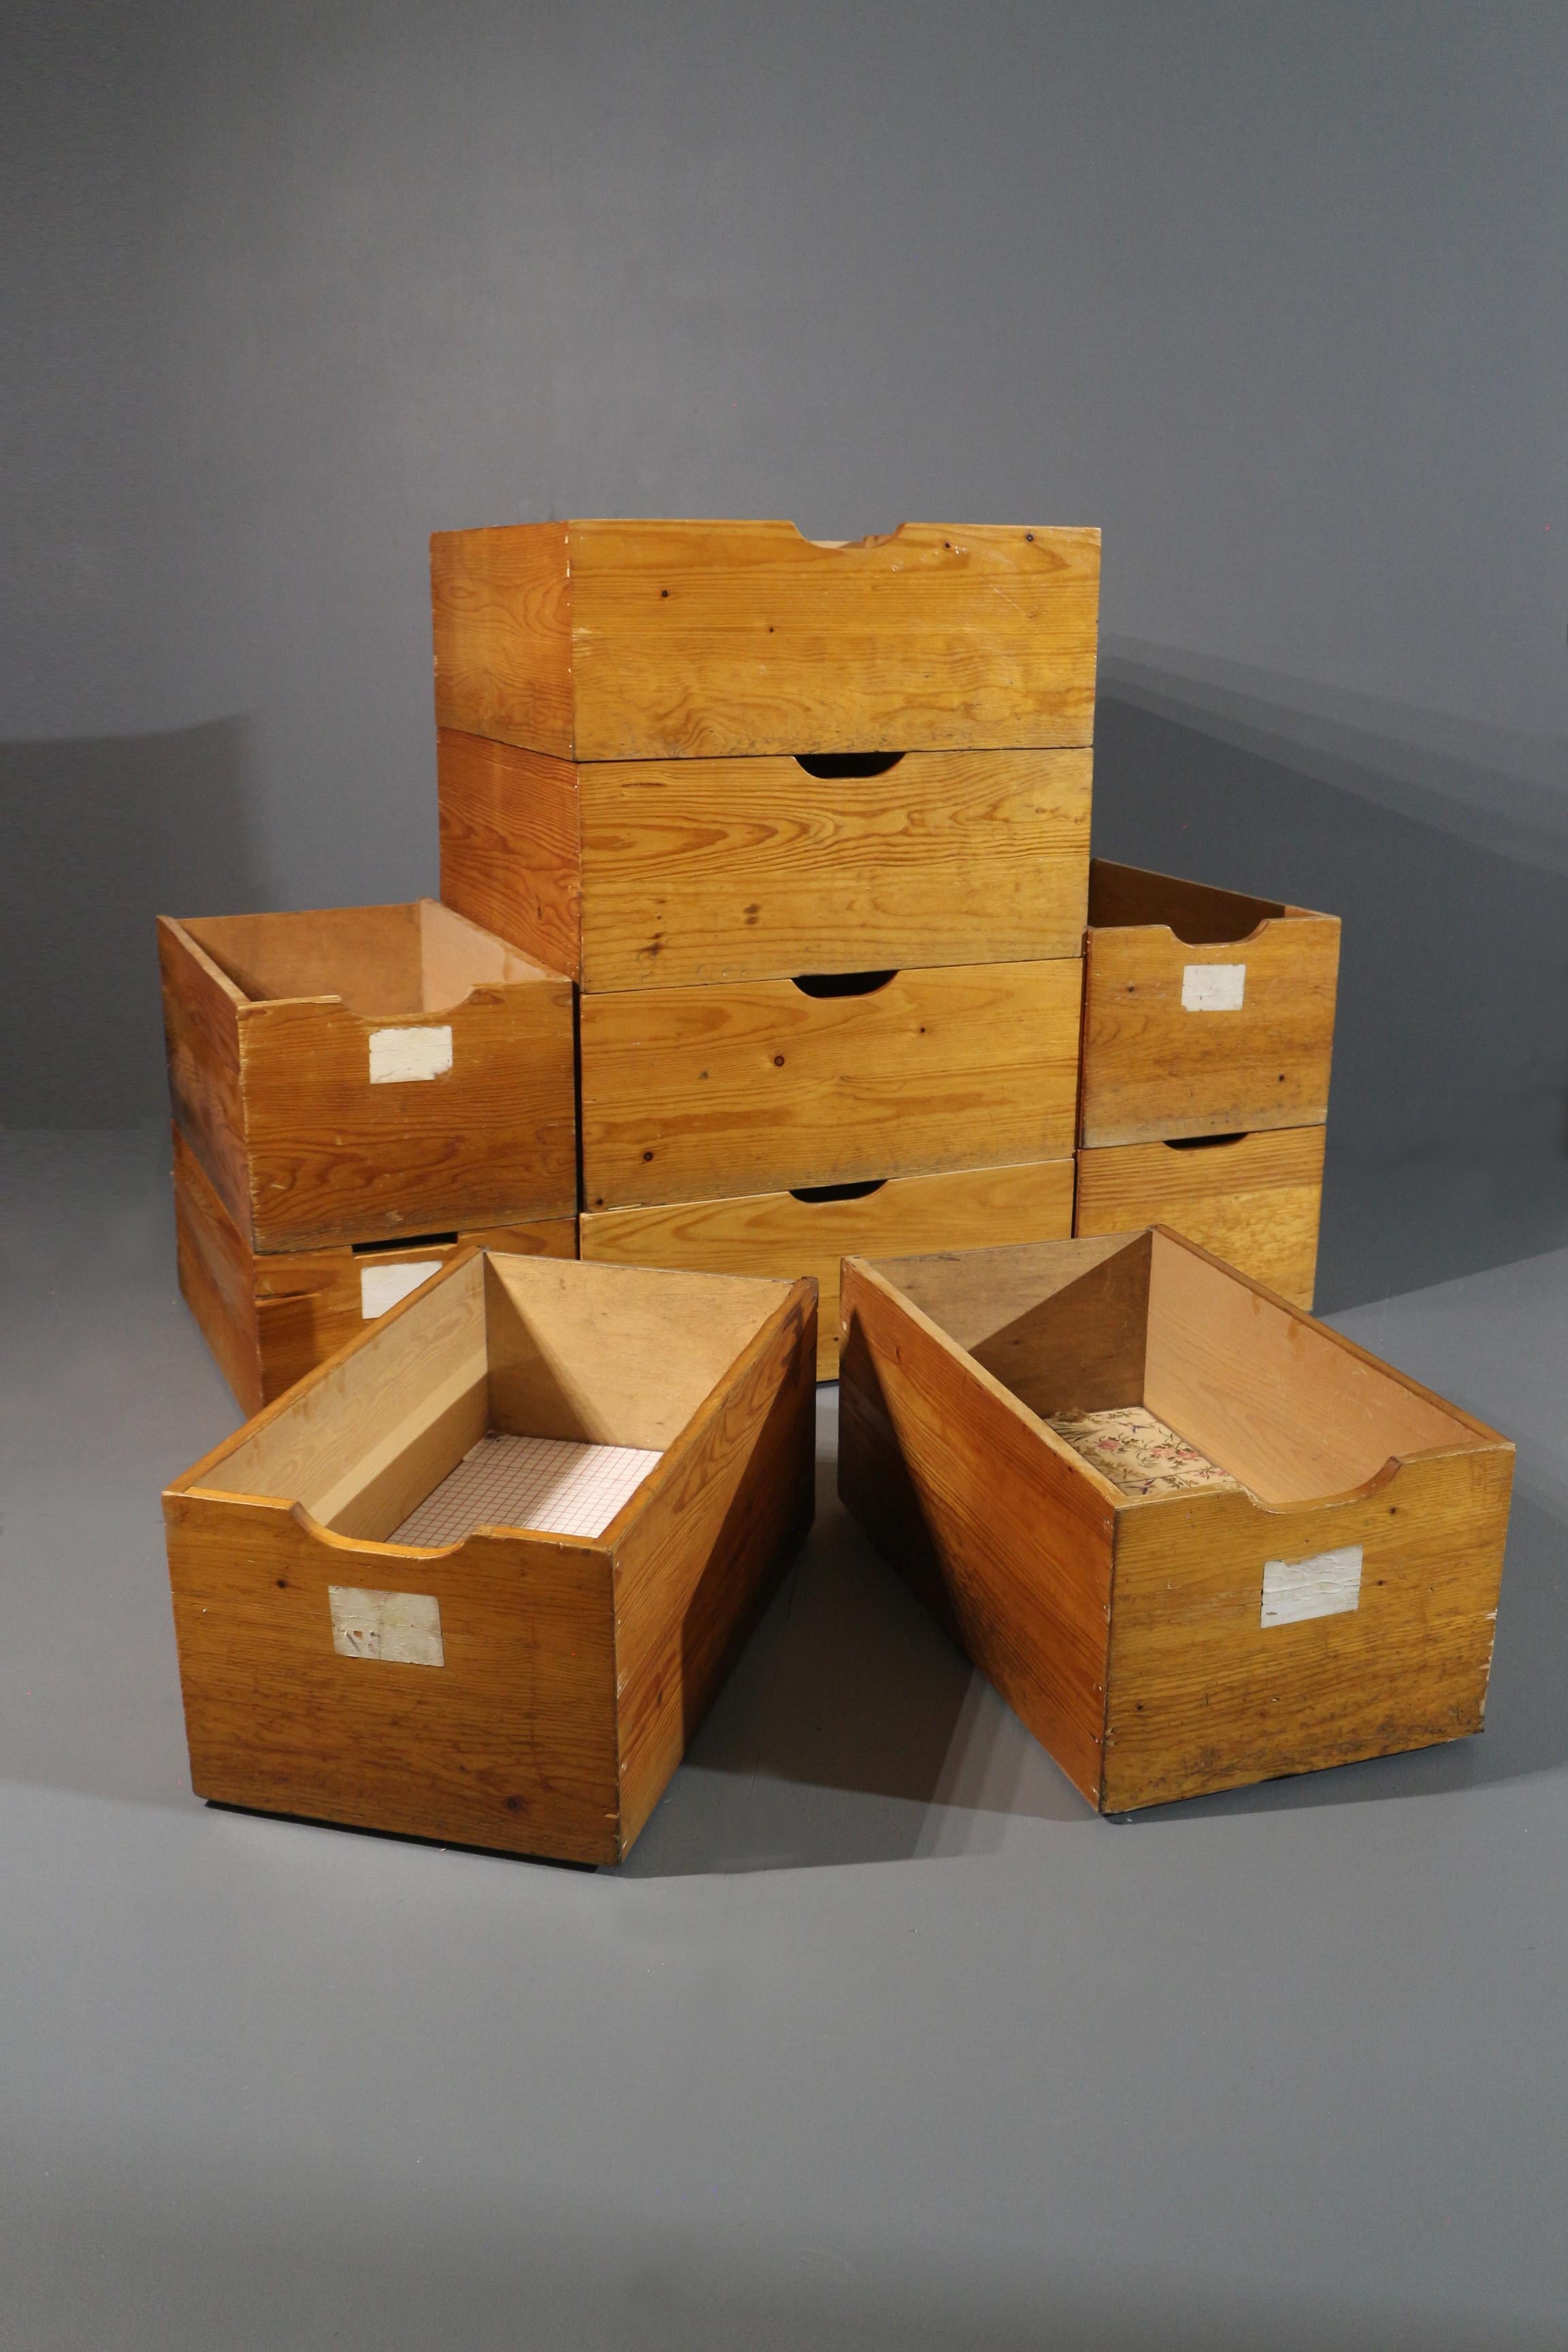 Storage boxes designed by Charlotte Perriand, jean Prouvé and Guy Rey-Millet for the mountain refugee 